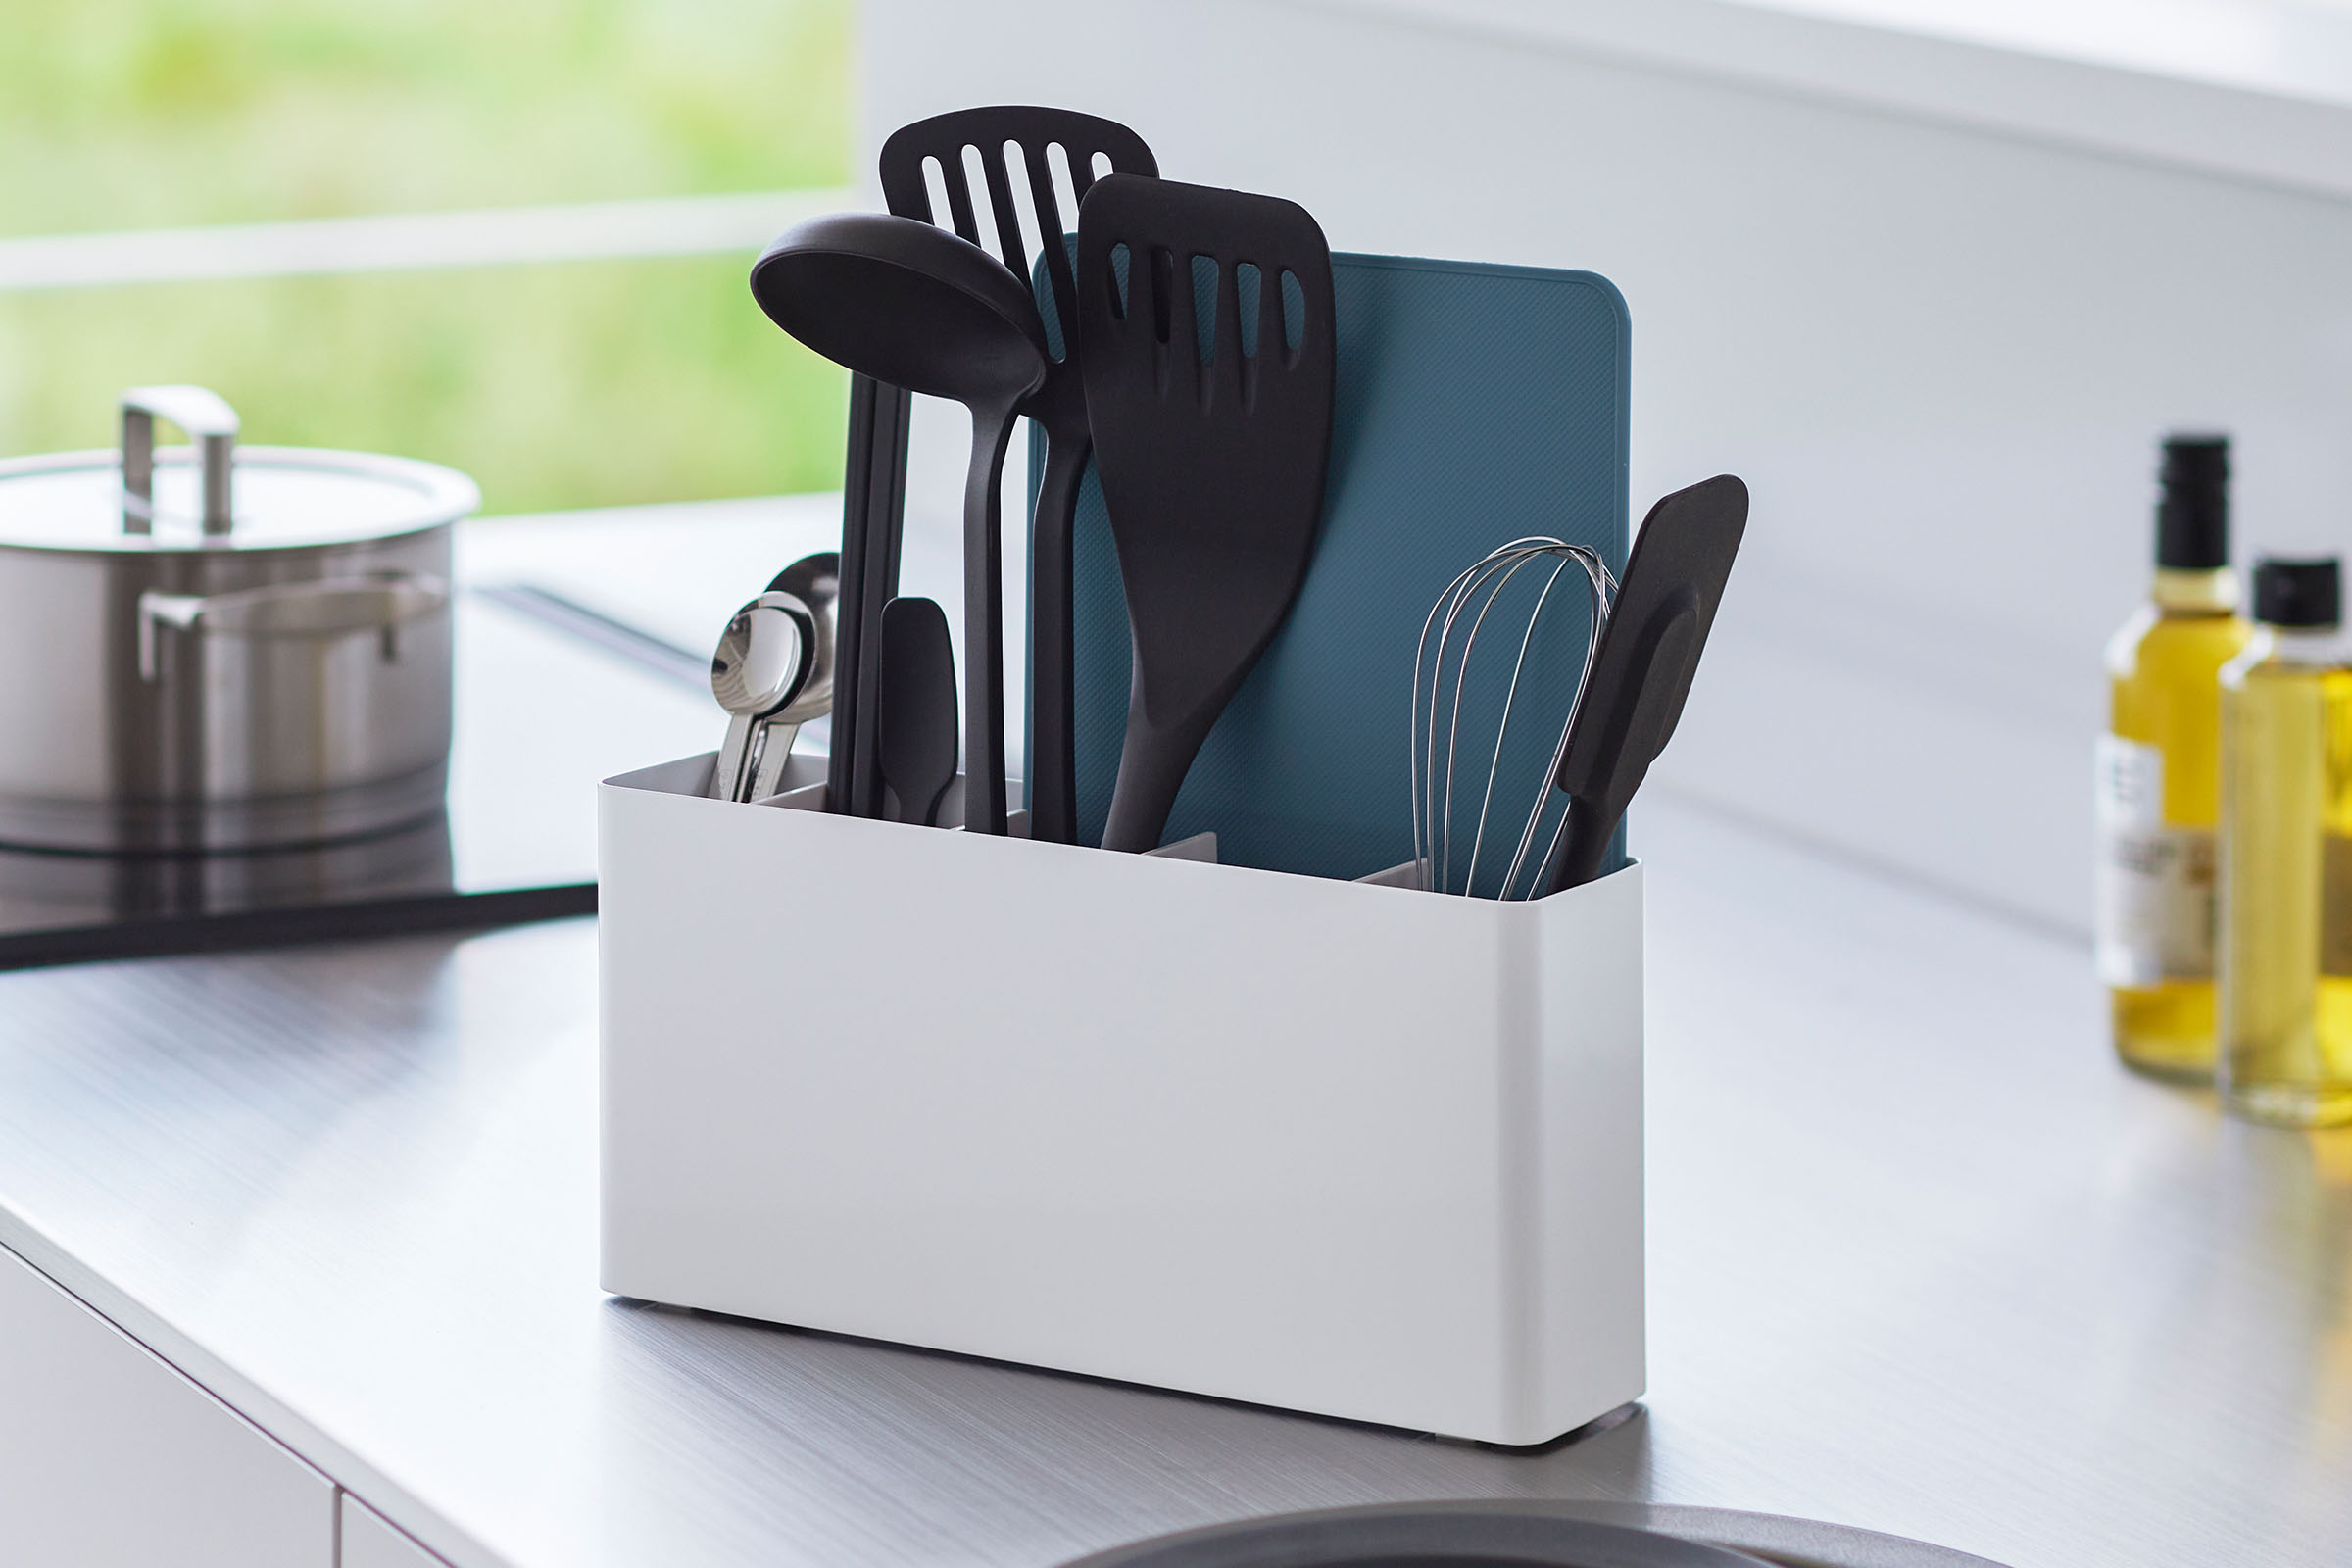 White Utensil & Thin Cutting Board Holder by Yamazaki Home on a kitchen counter, holding various utensils and a cutting board.